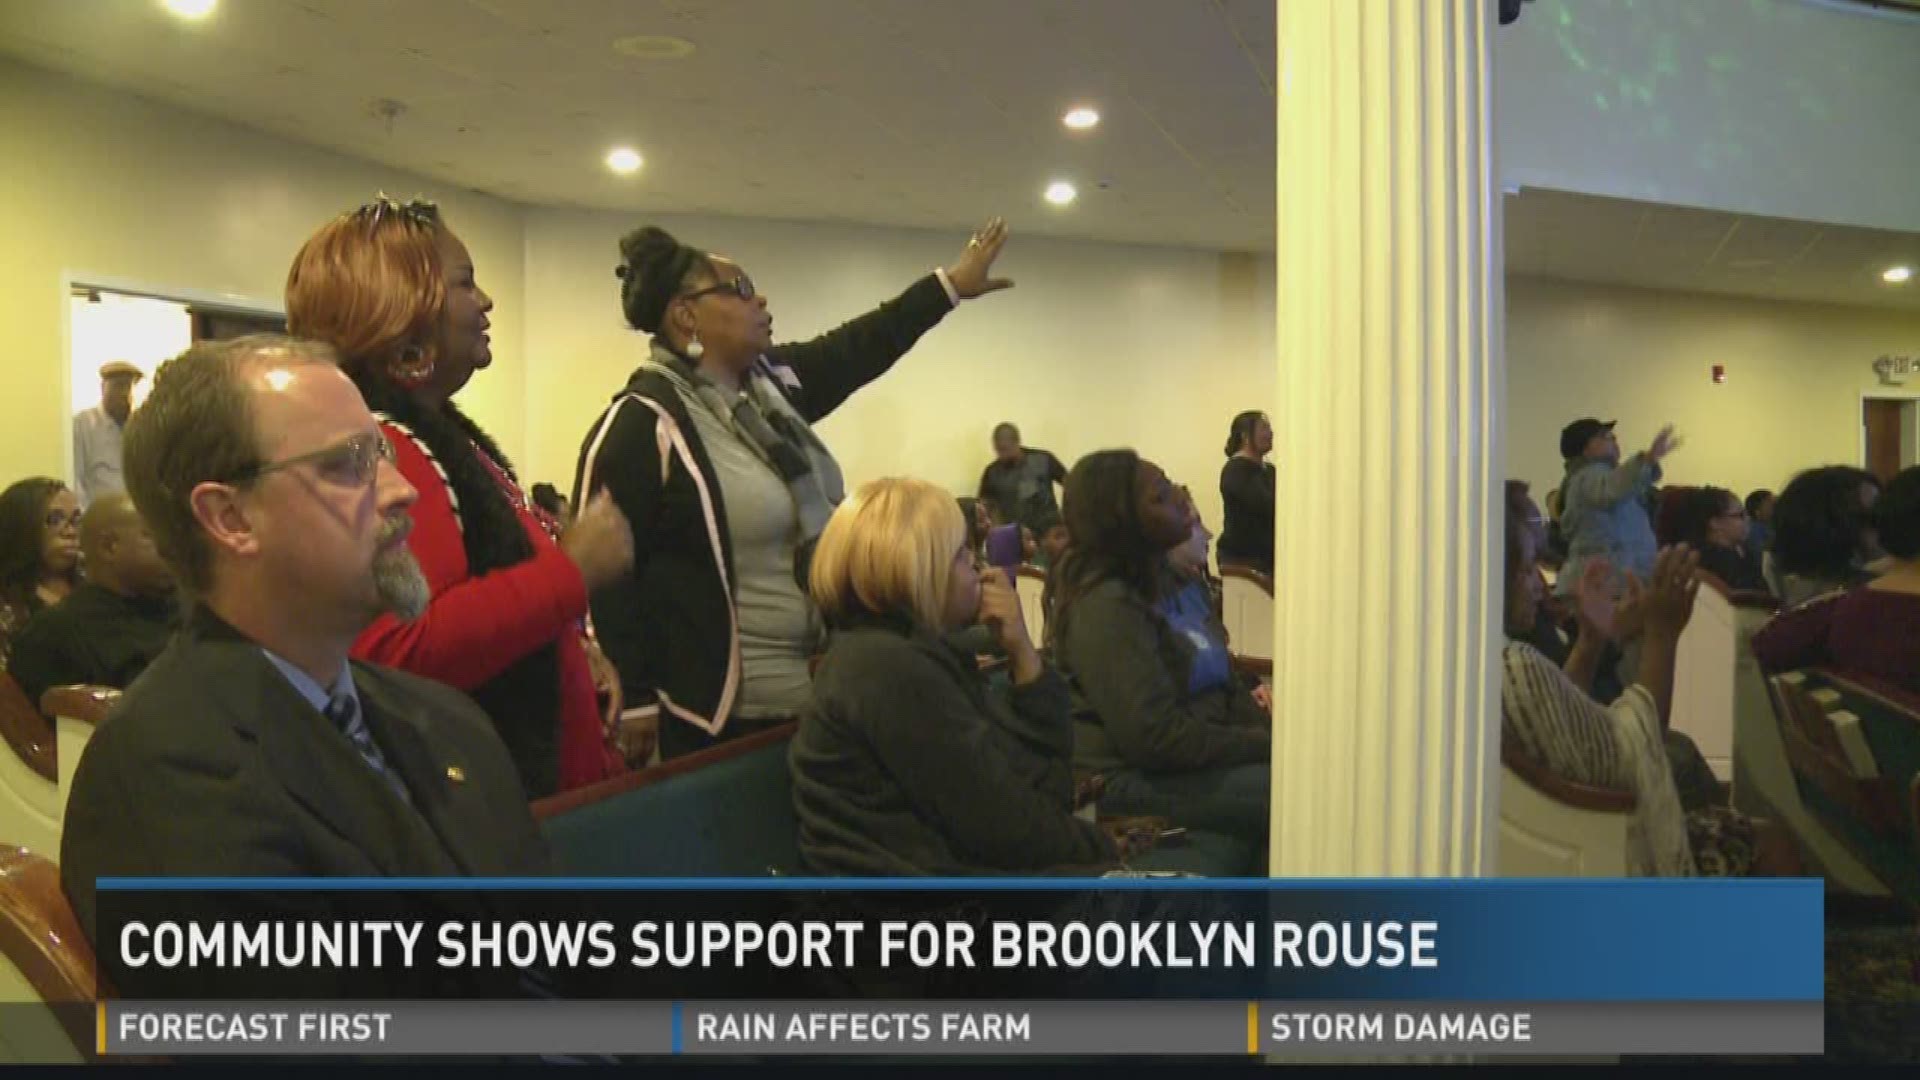 Community shows support for Brooklyn Rouse